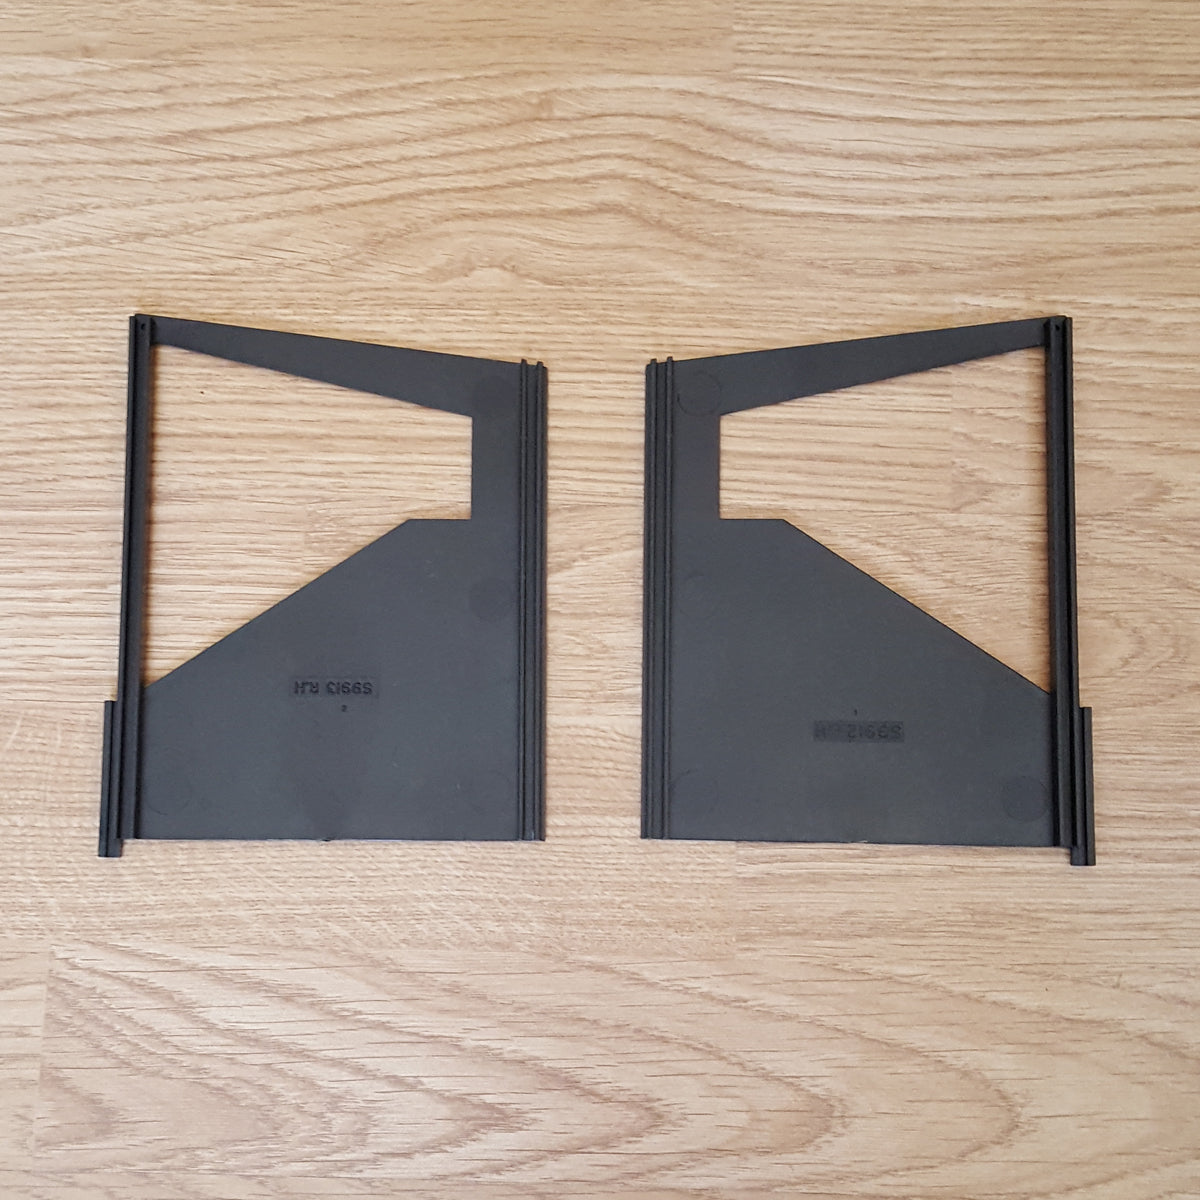 Scalextric 1:32 Spare Part - C705 Grandstand Black Side Panels